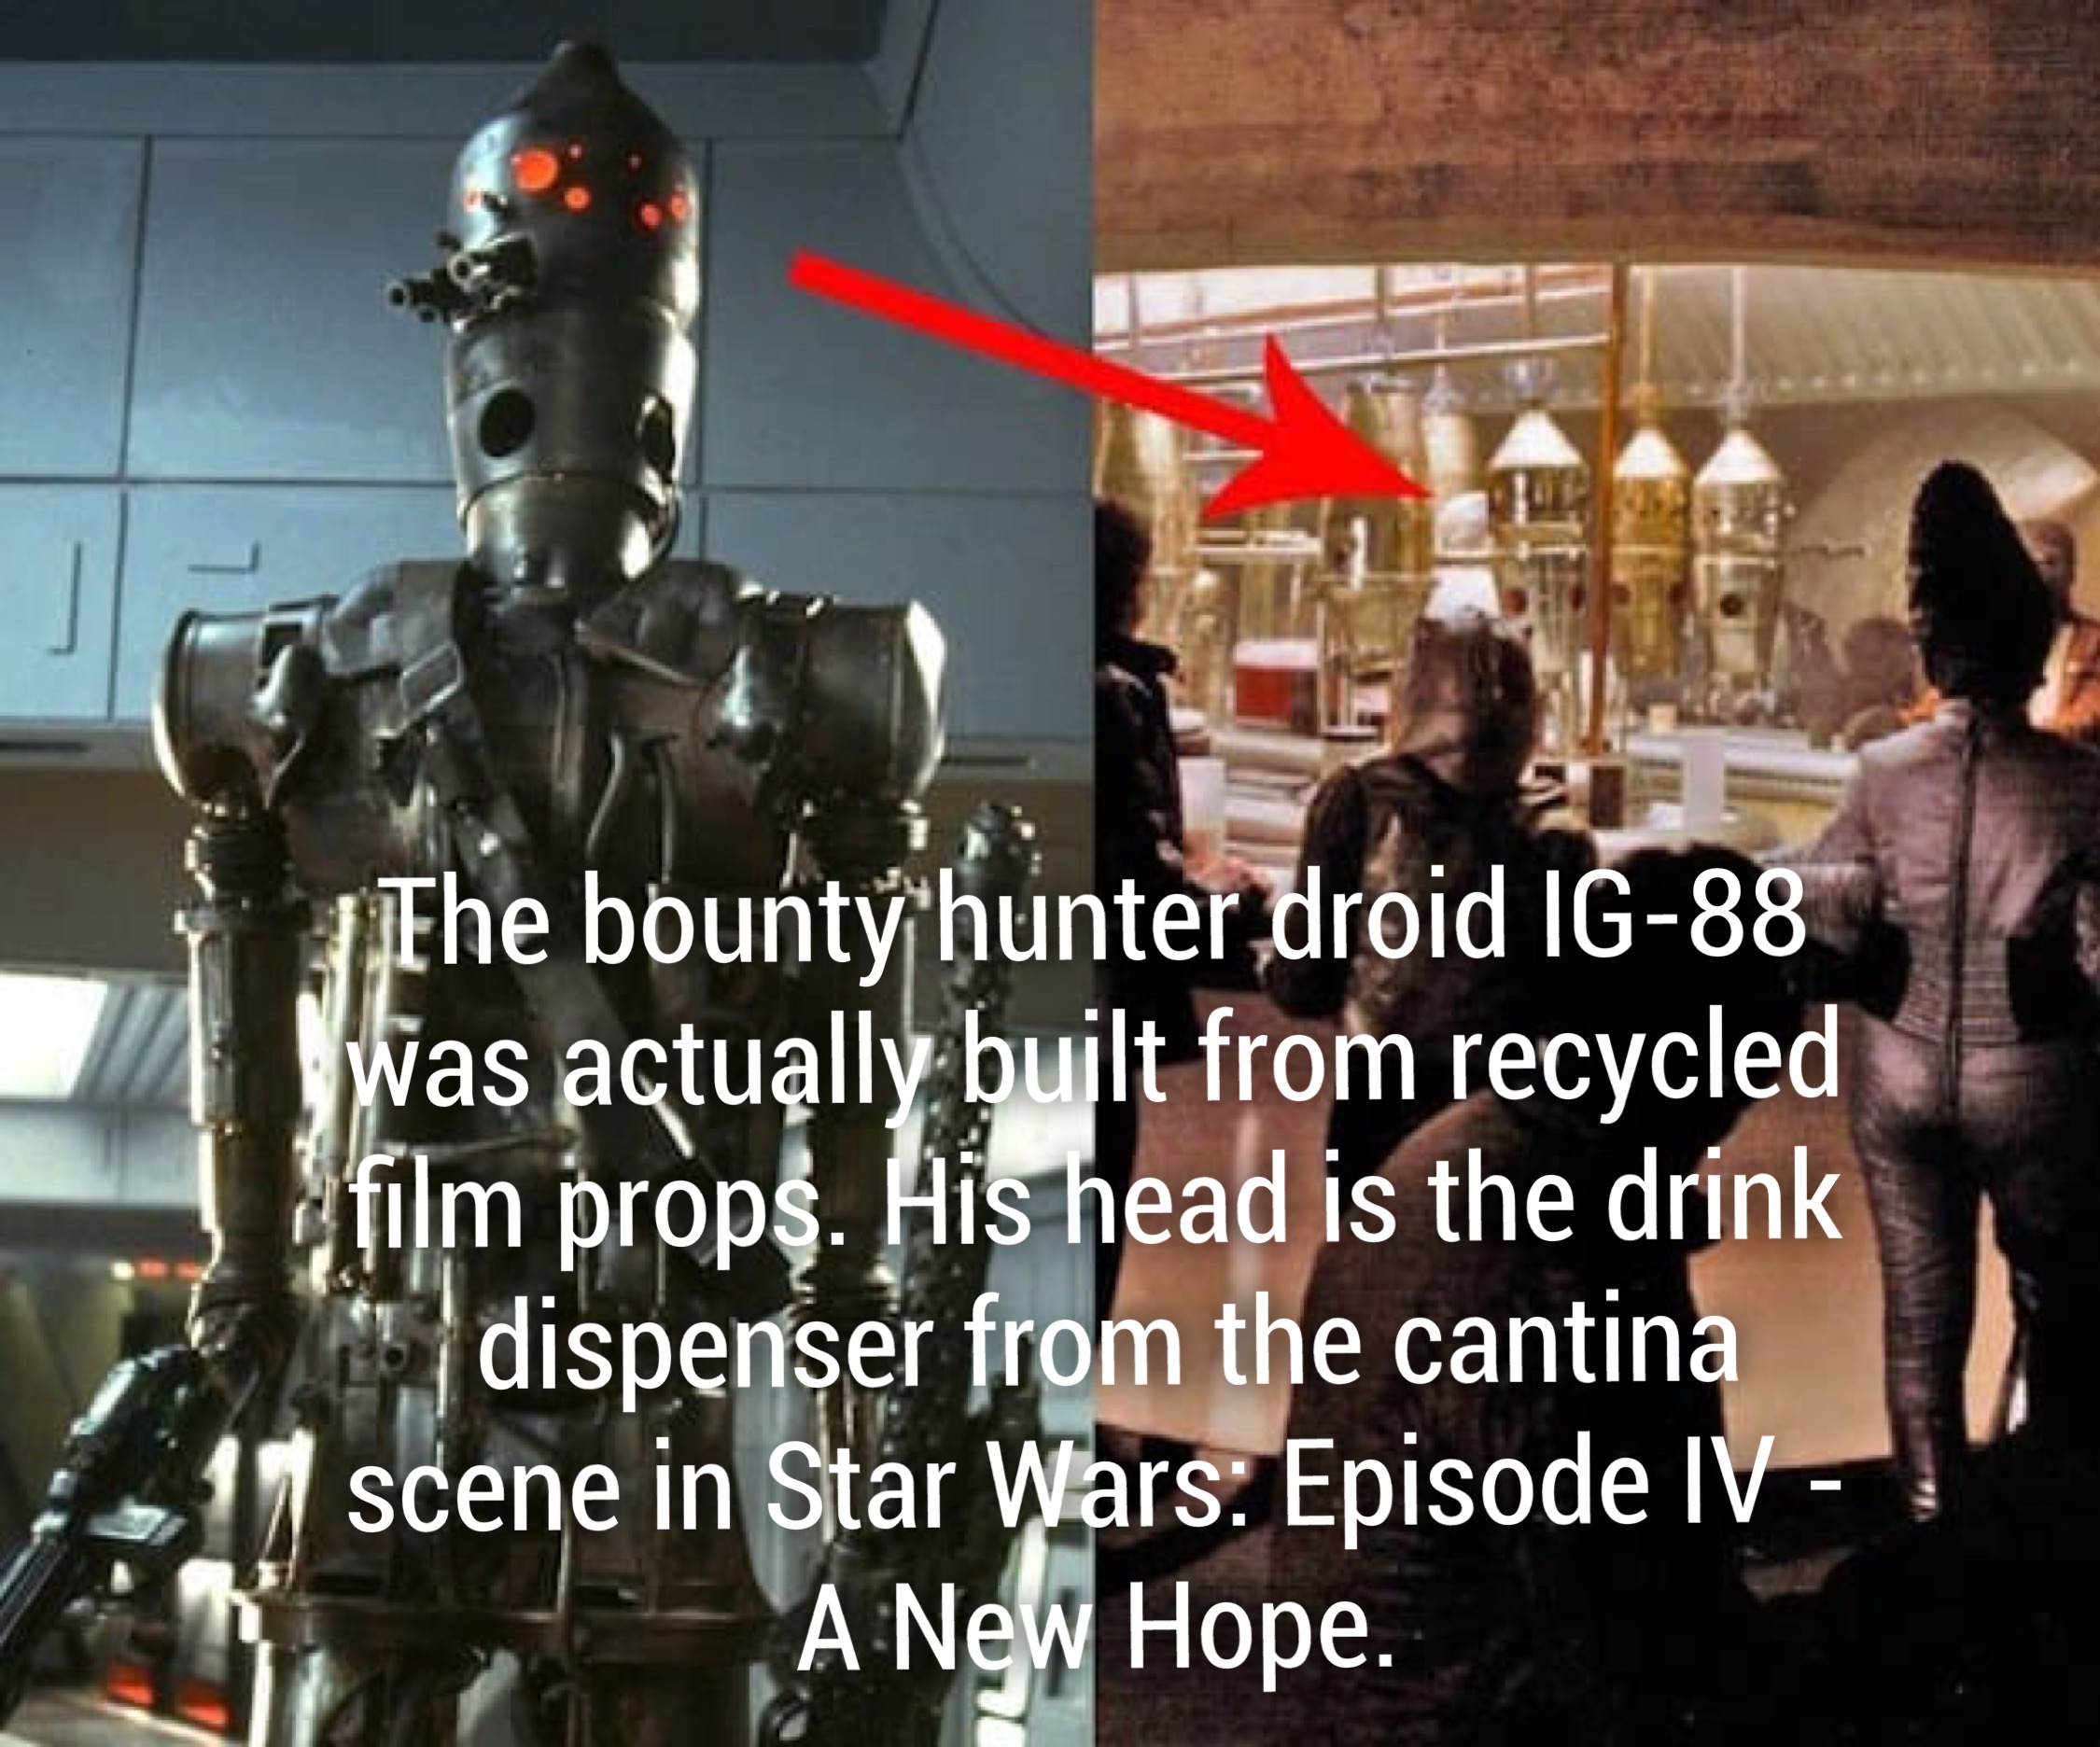 the bounty hunter droid Ig88 Wwas actually built from recycled film props. His head is the drink dispenser from the cantina scene in Star Wars Episode Iv A New Hope.